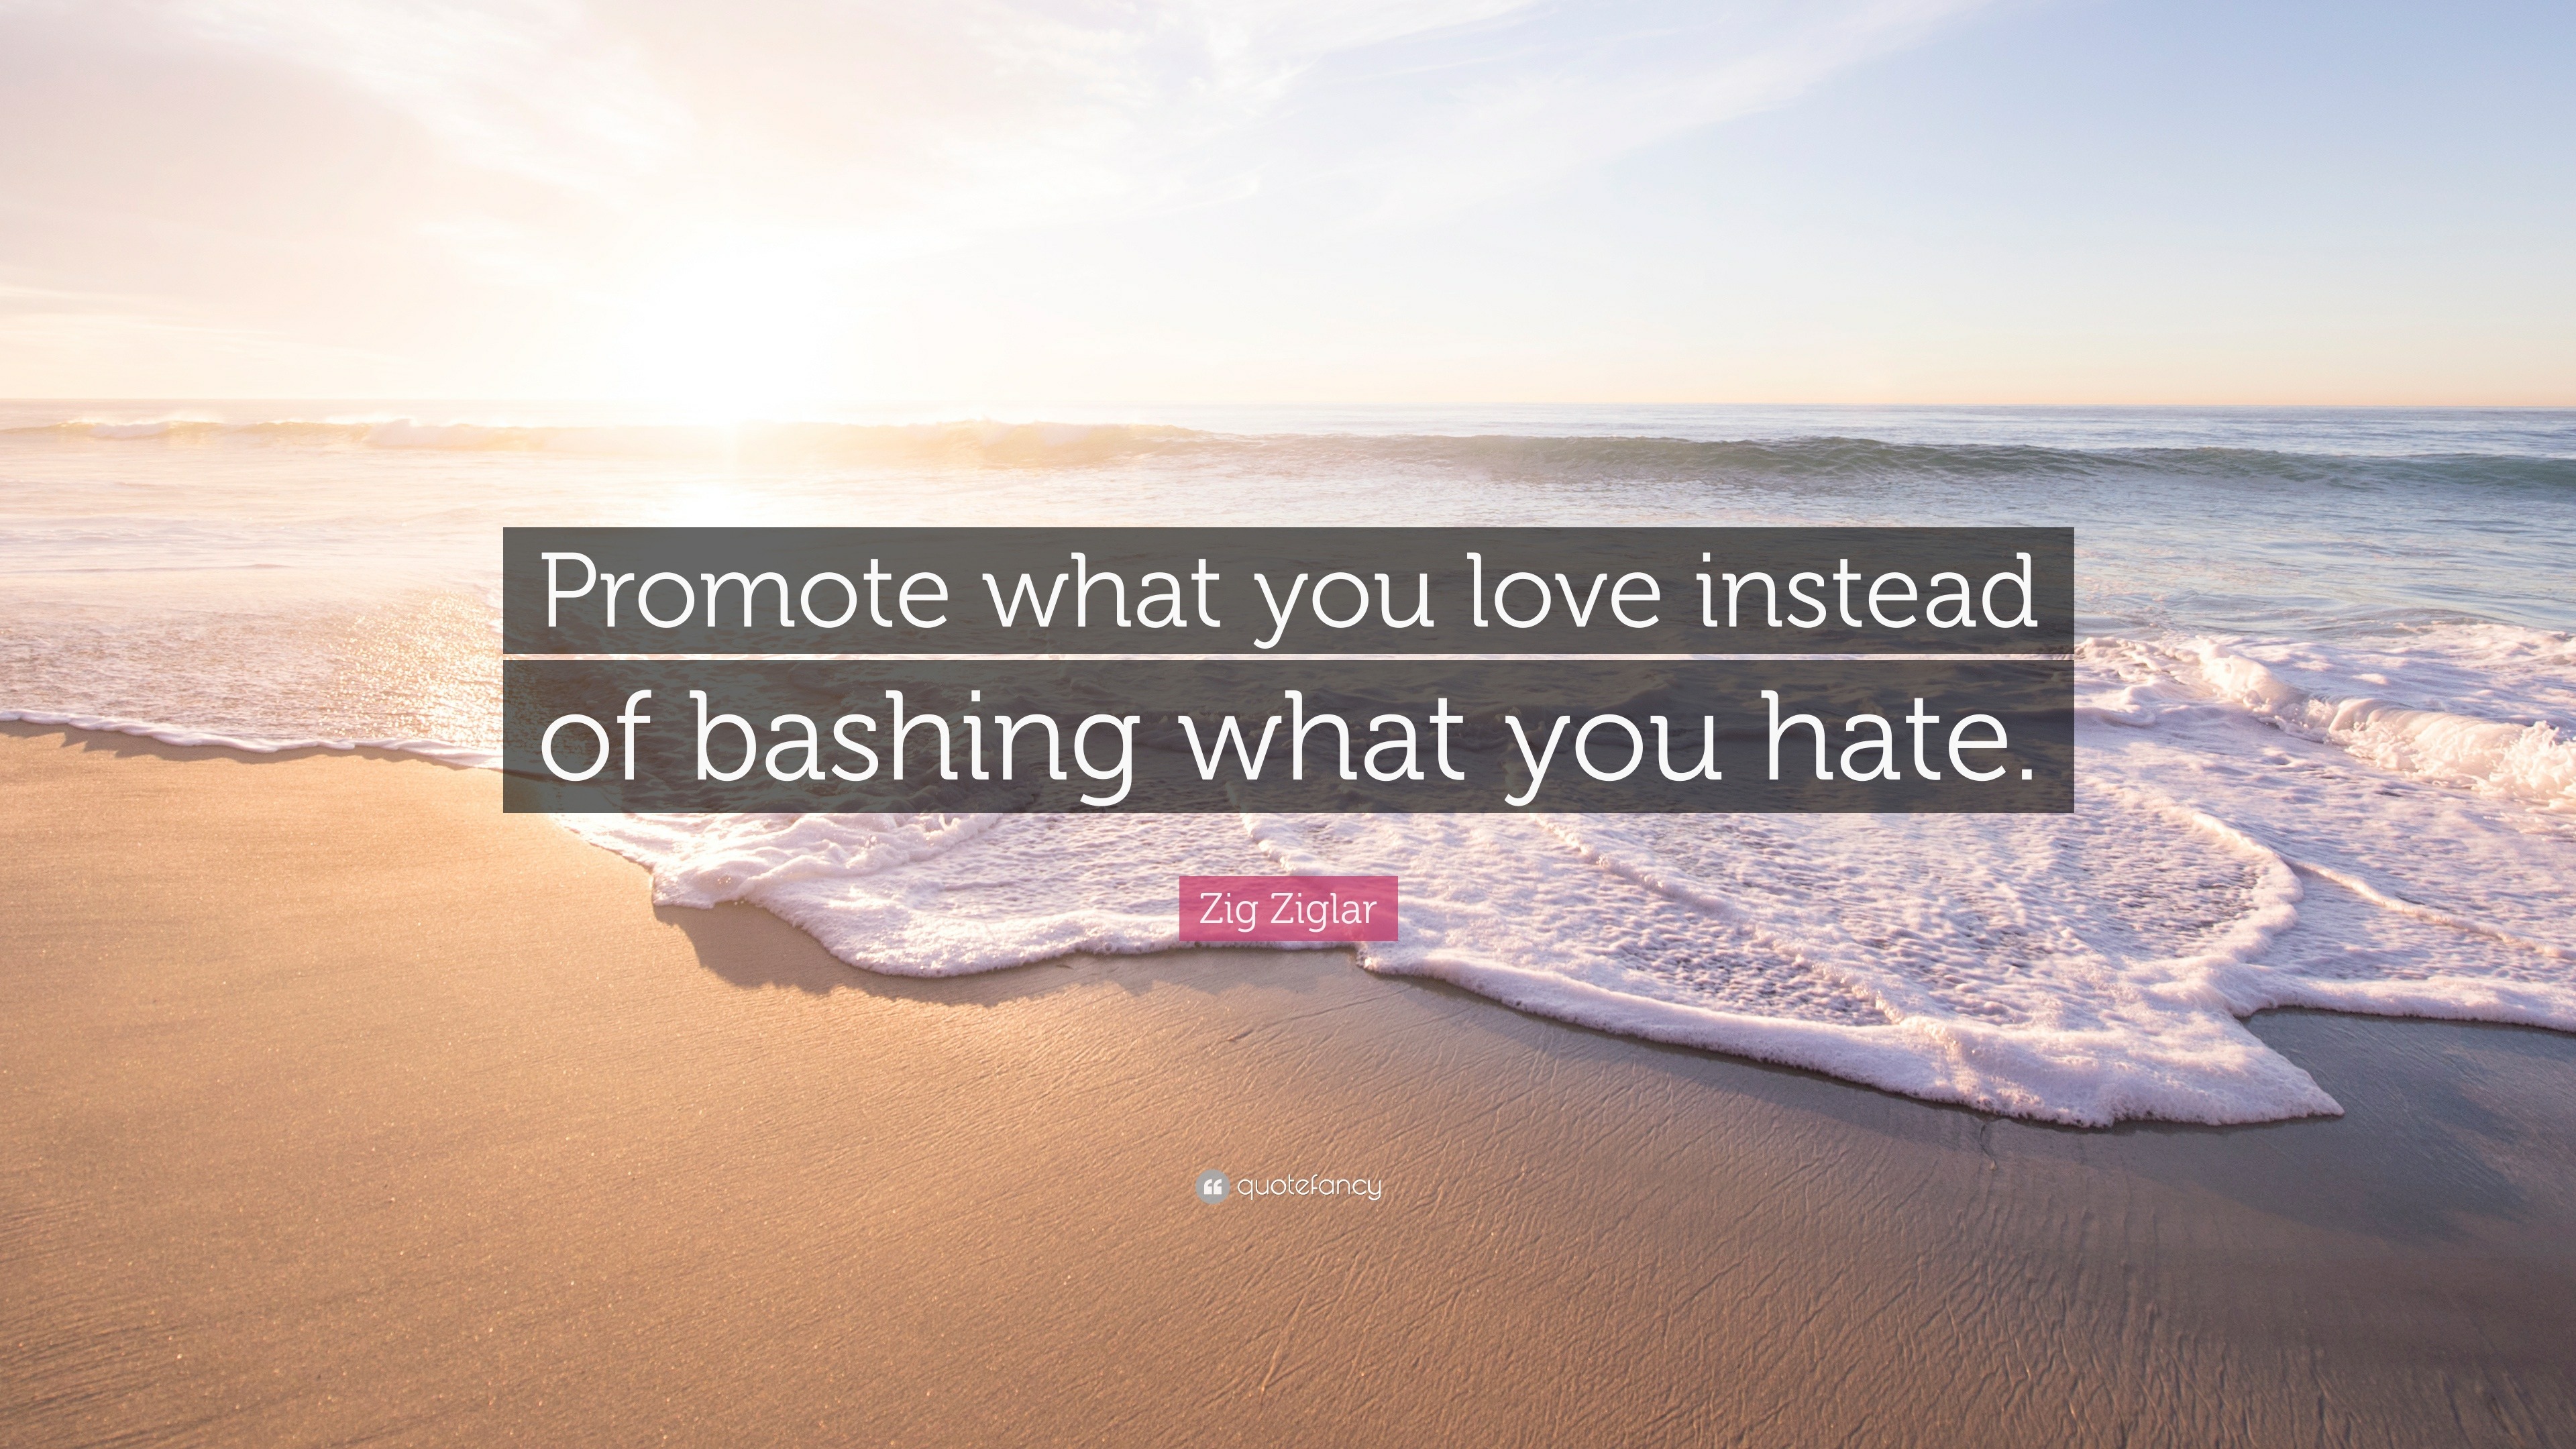 Zig Ziglar Quote “Promote what you love instead of bashing what you hate